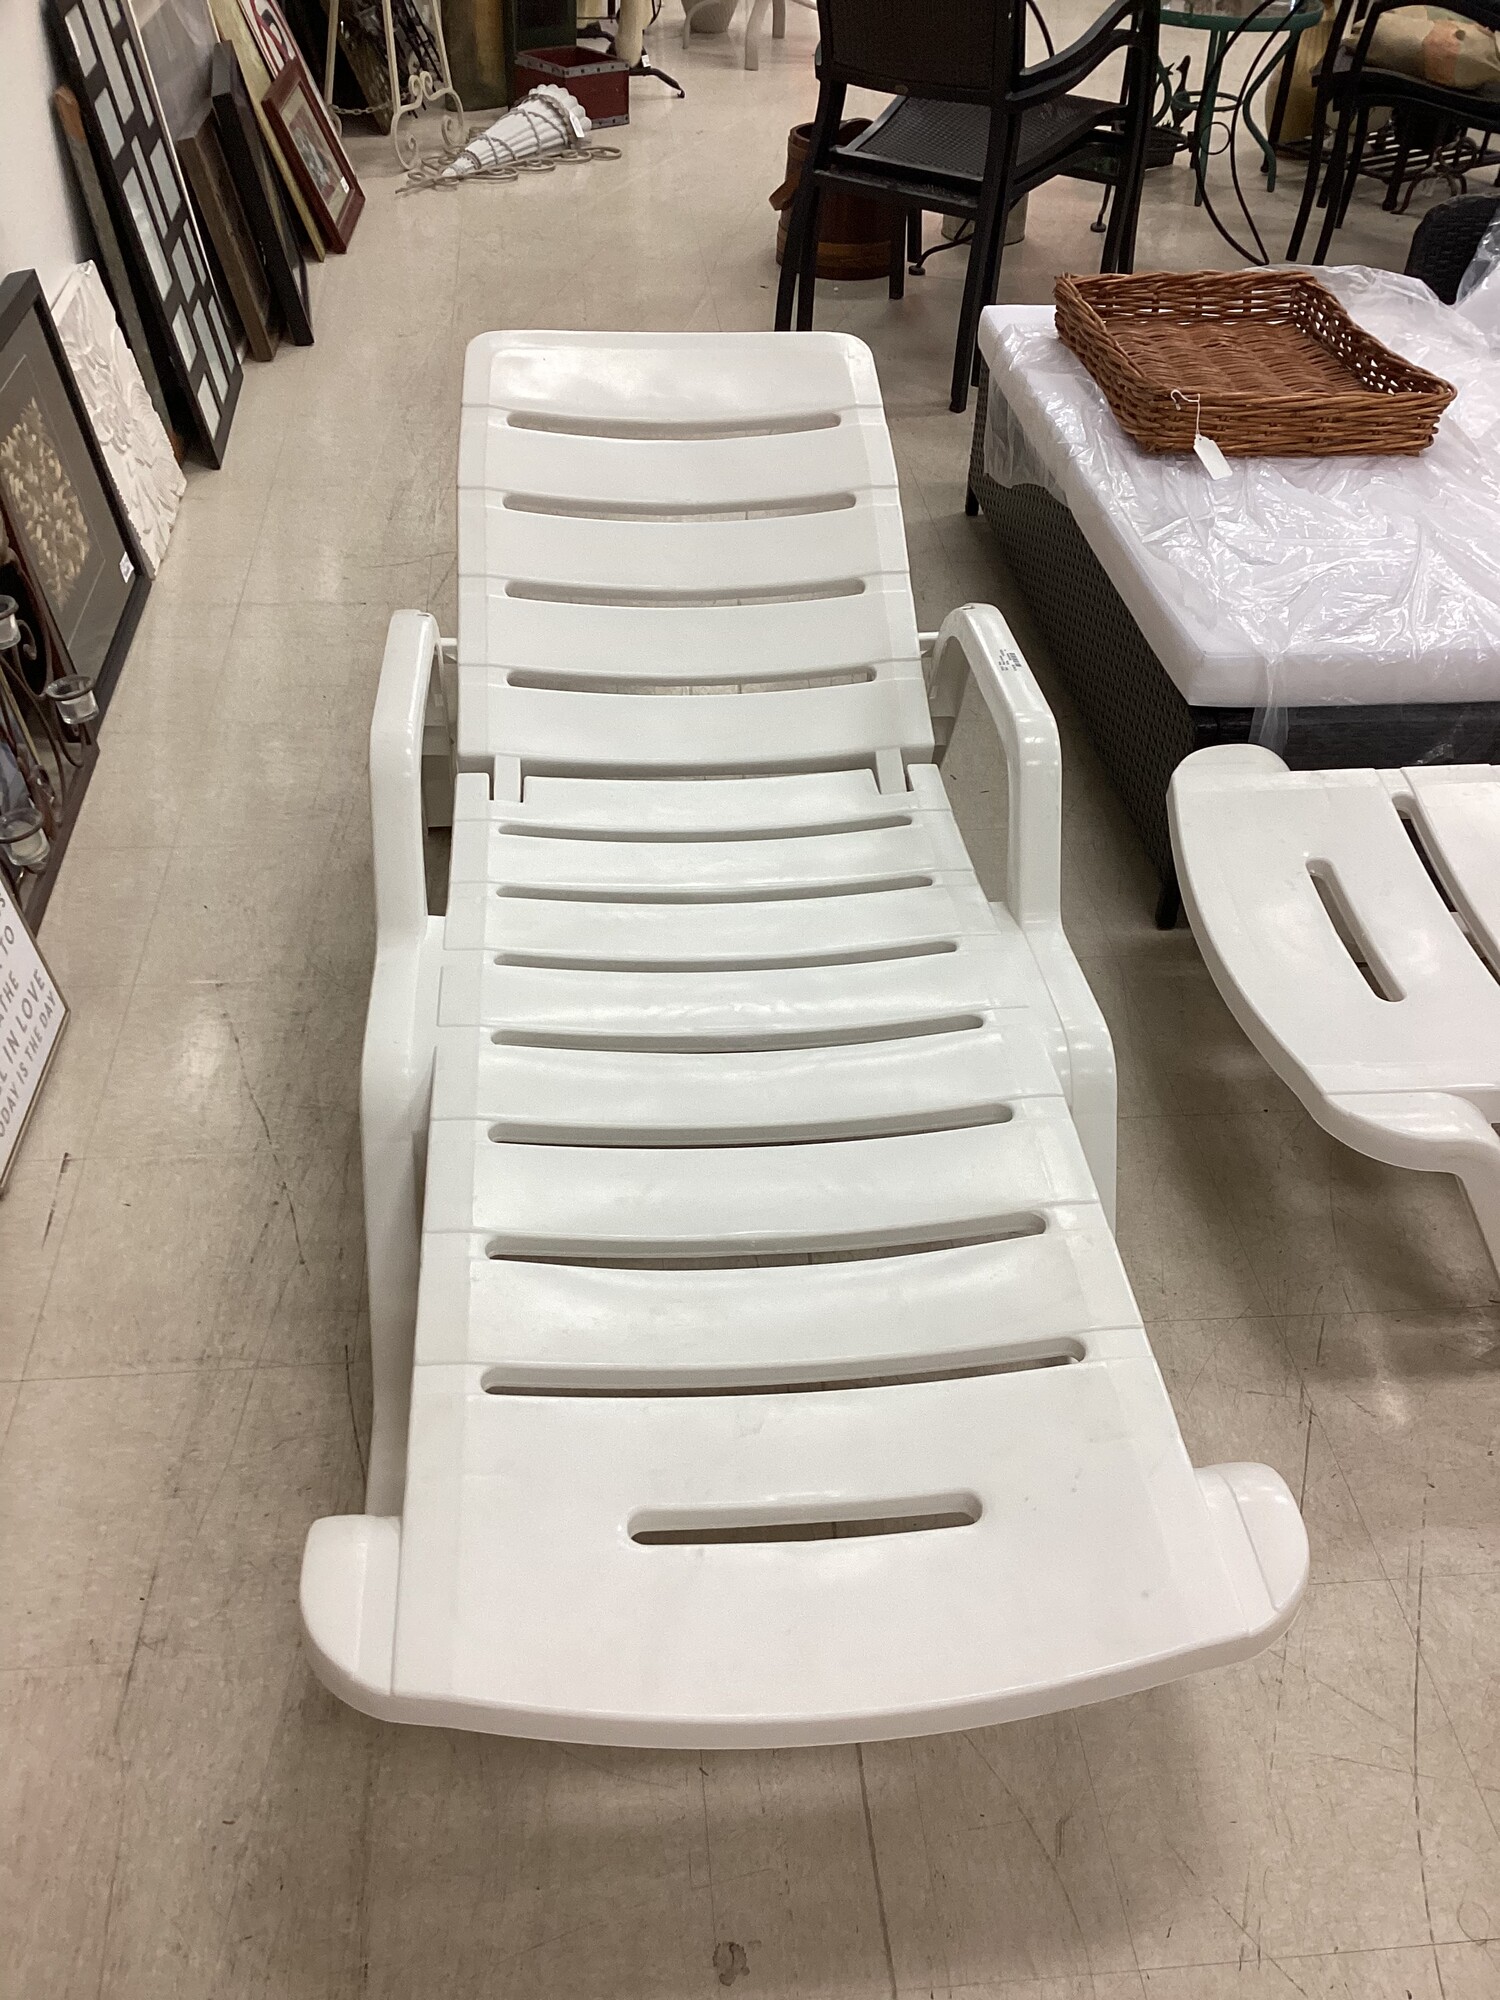 Patio Lounger, White, Adjustable
70 In x 27 In